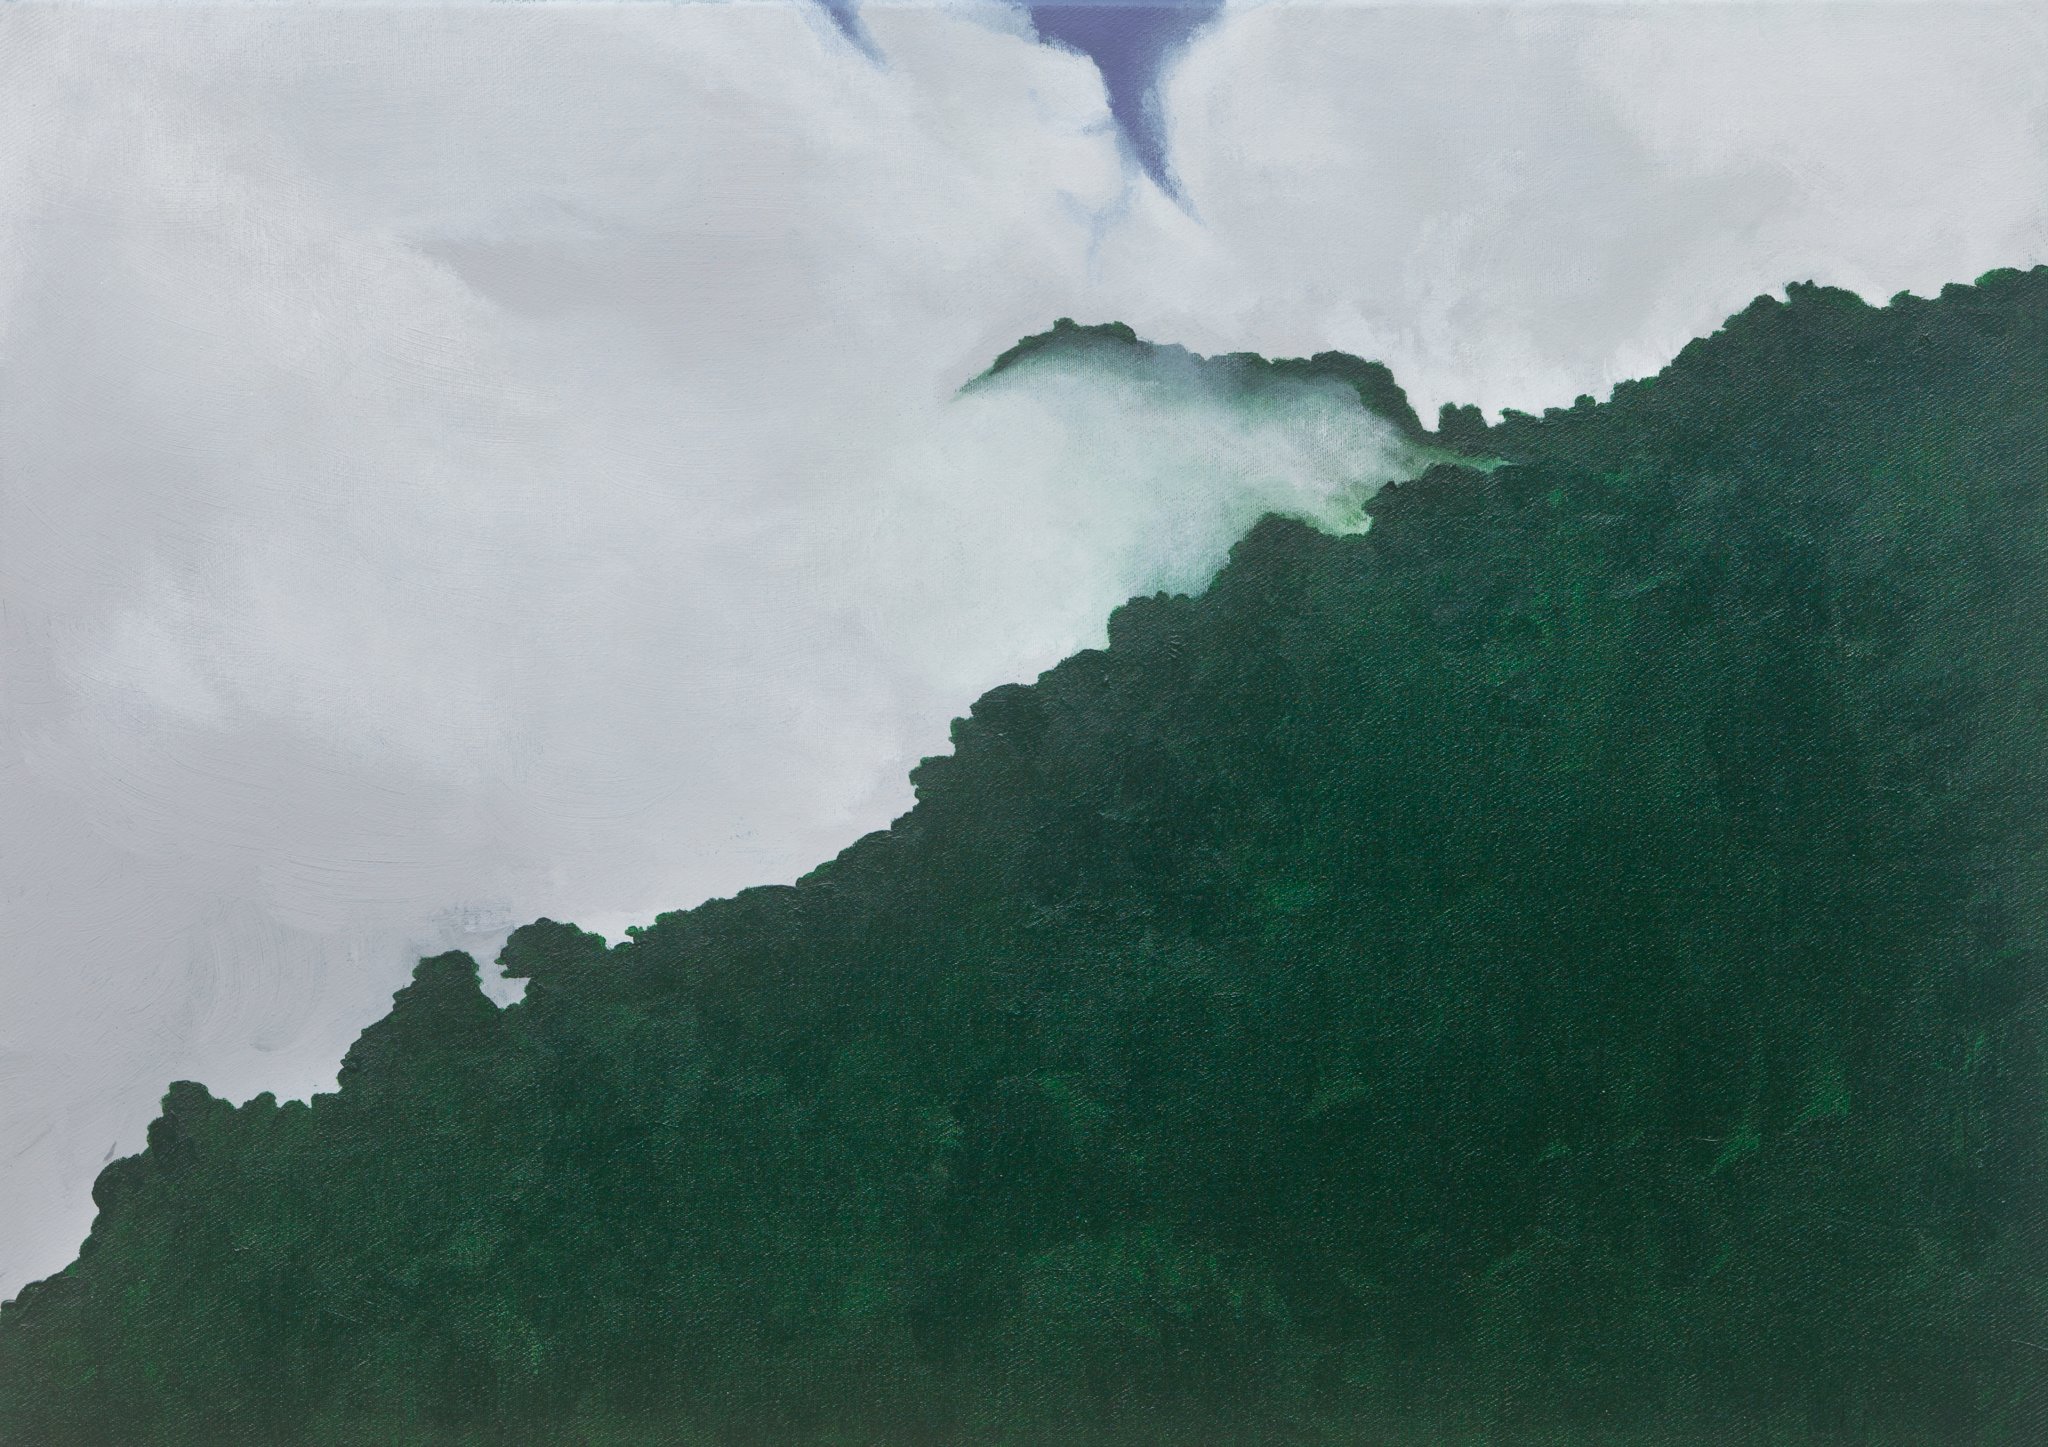 Painting of a green mountain with passing clouds